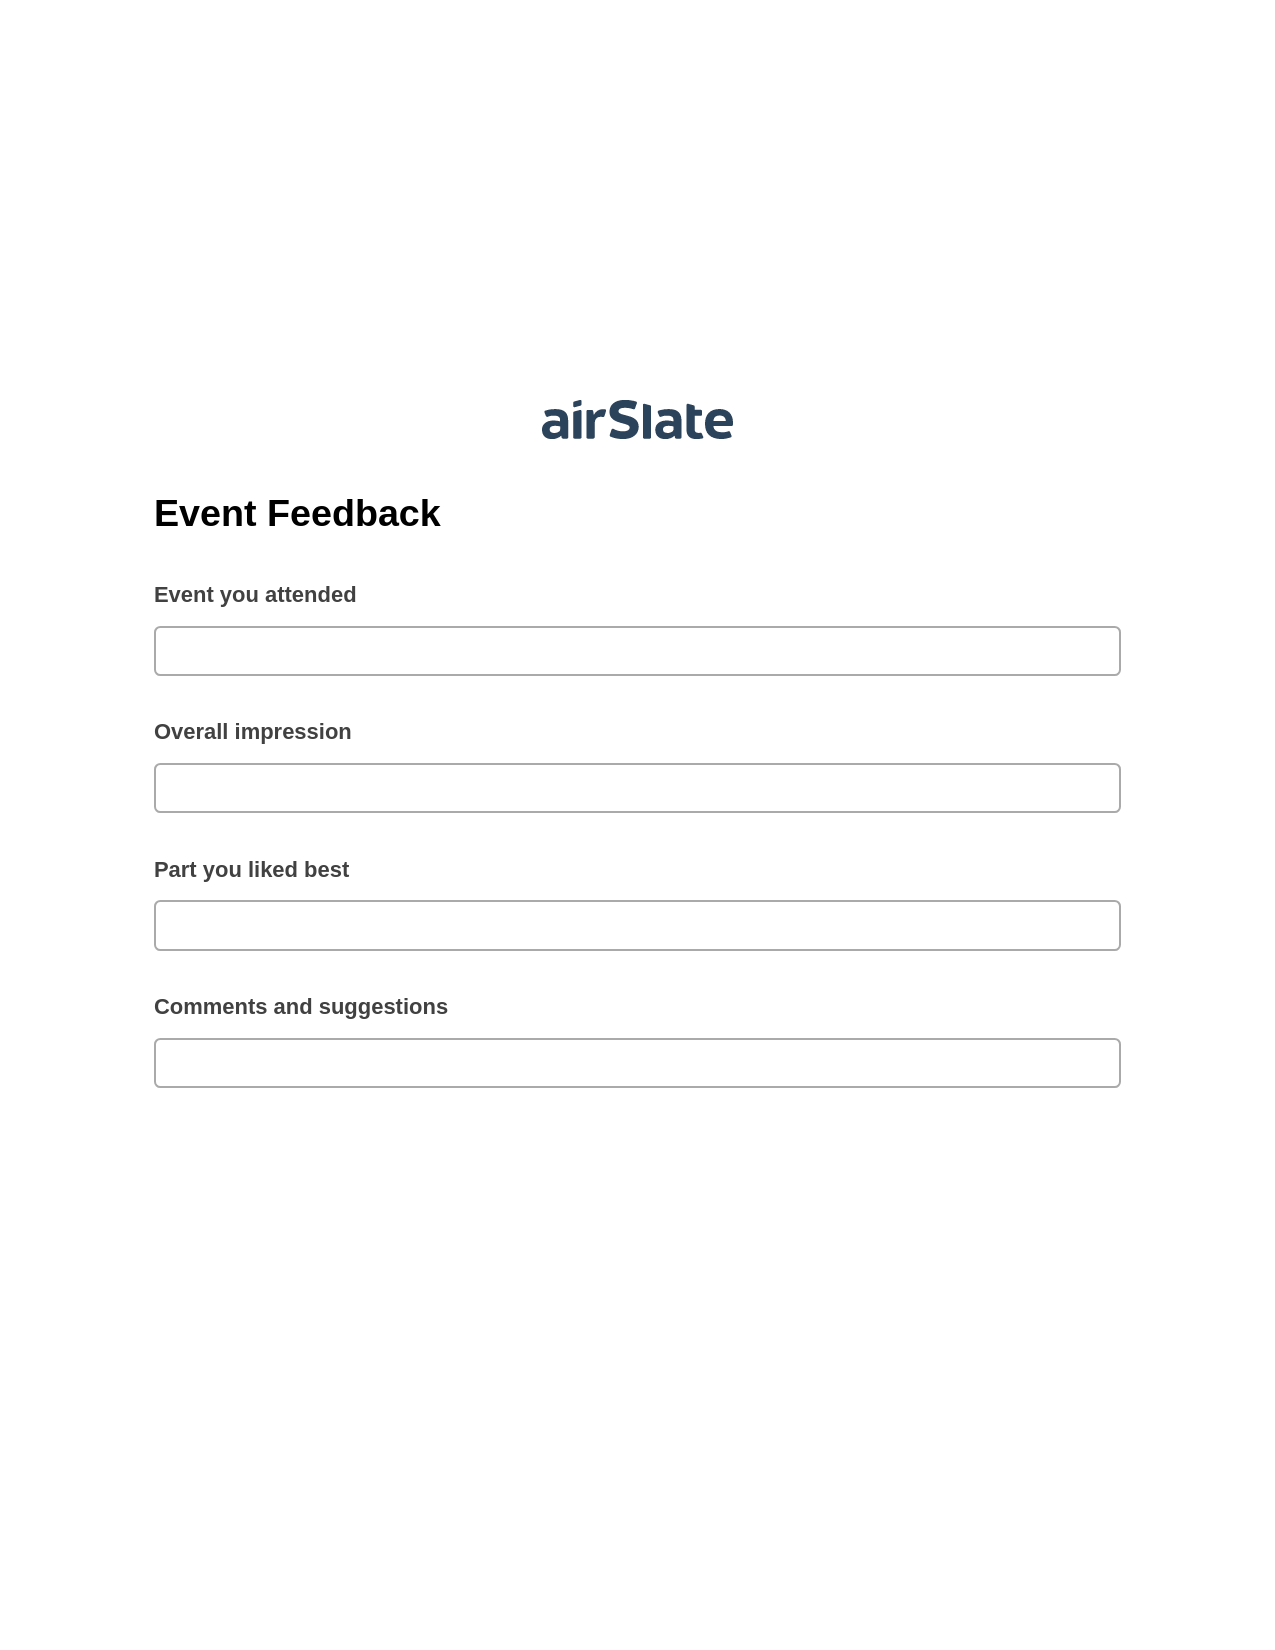 Event Feedback Pre-fill from NetSuite Records Bot, Roles Reminder Bot, Export to Formstack Documents Bot